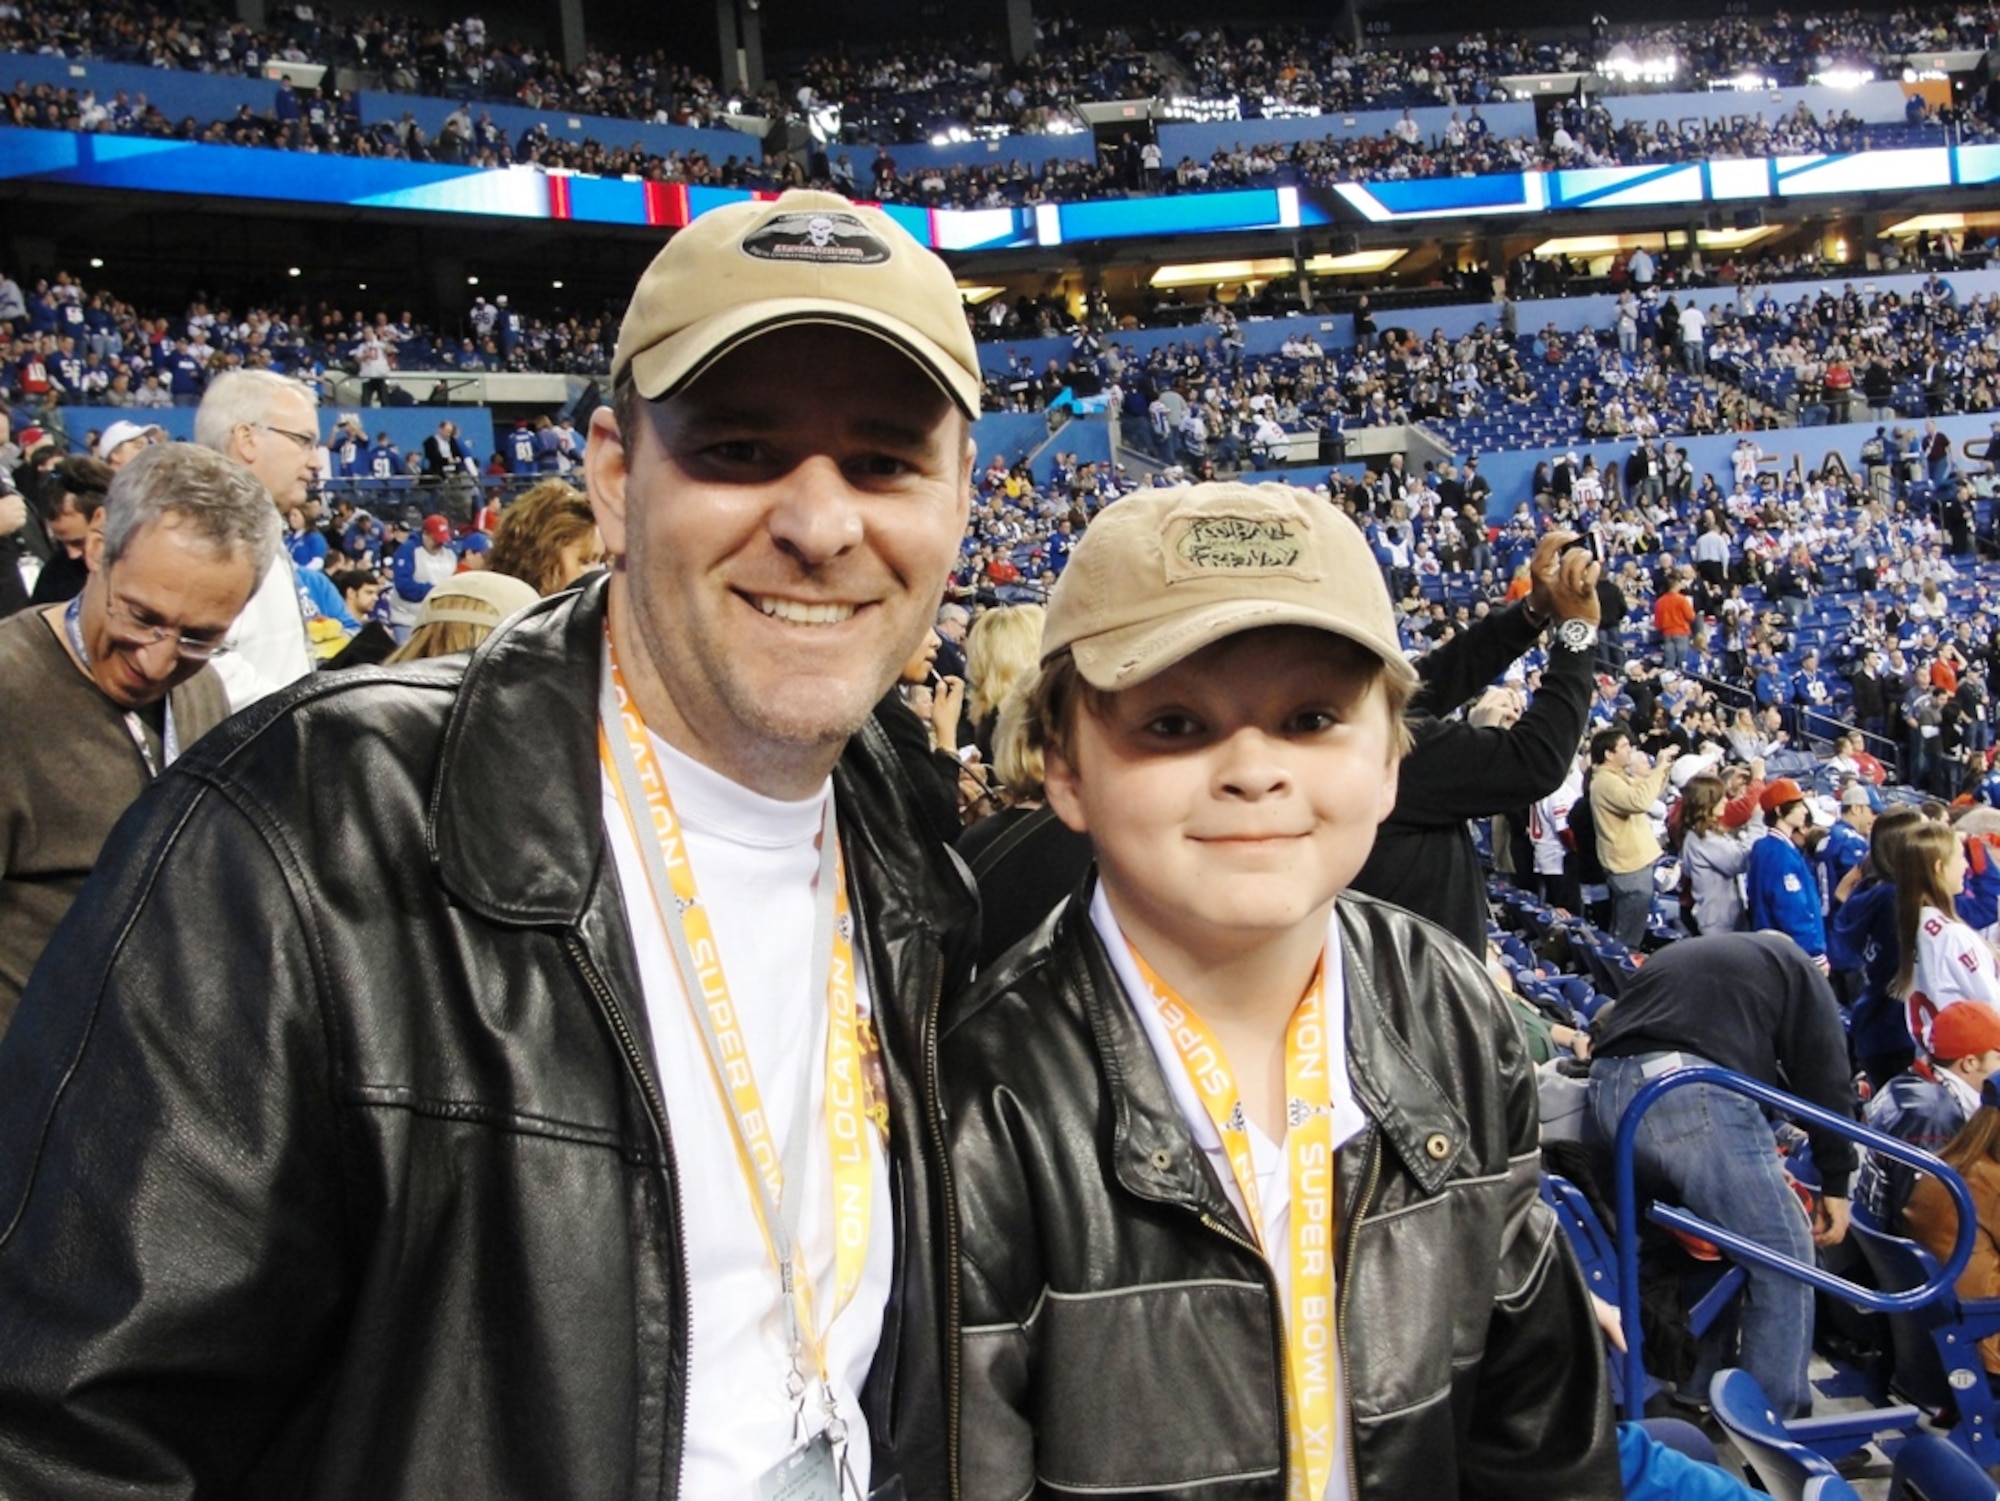 Lt. Col. Brian Hoyback and his son A.J. of Wright Patterson Air Force Base, Ohio, pose for a photo from the stands of Lucas Oil Stadium during Super Bowl XLVI Feb. 5 in Indianapolis. Hoyback was one of four Air Force club members who participated in the annual Football Frenzy promotion and won a four-day trip to the sporting event. (Courtesy photo)